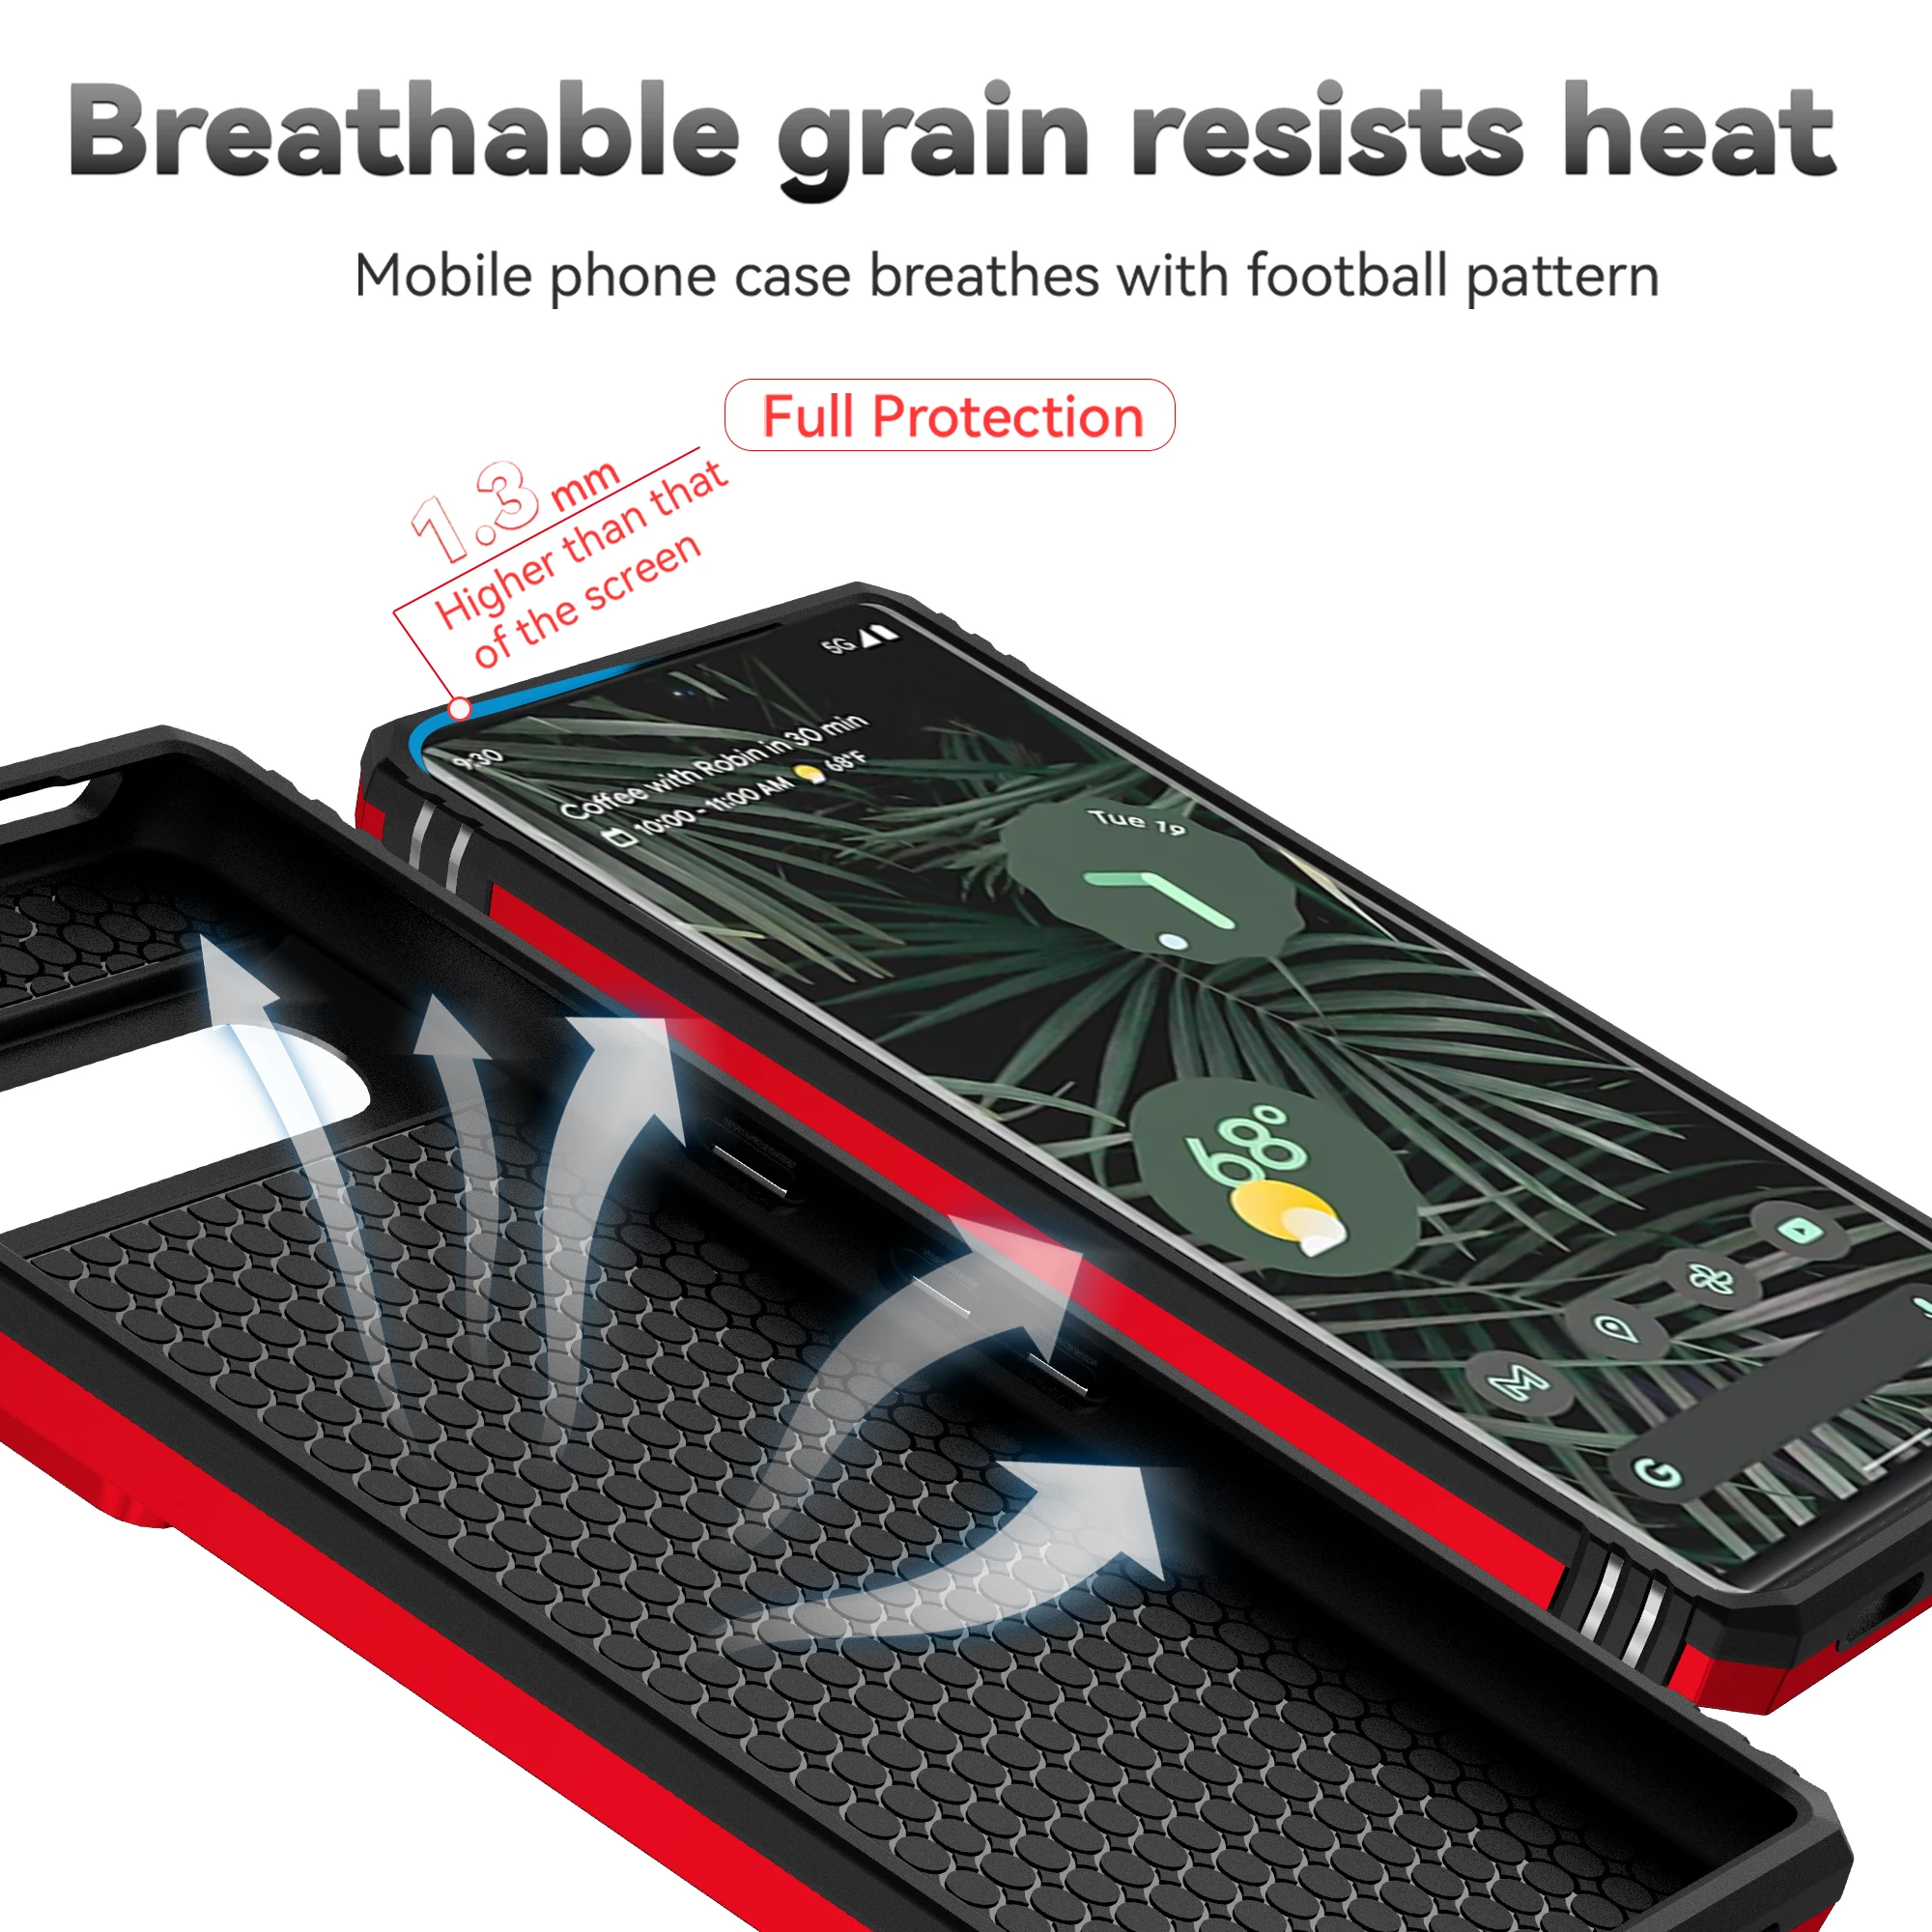 Breathable heat resistant